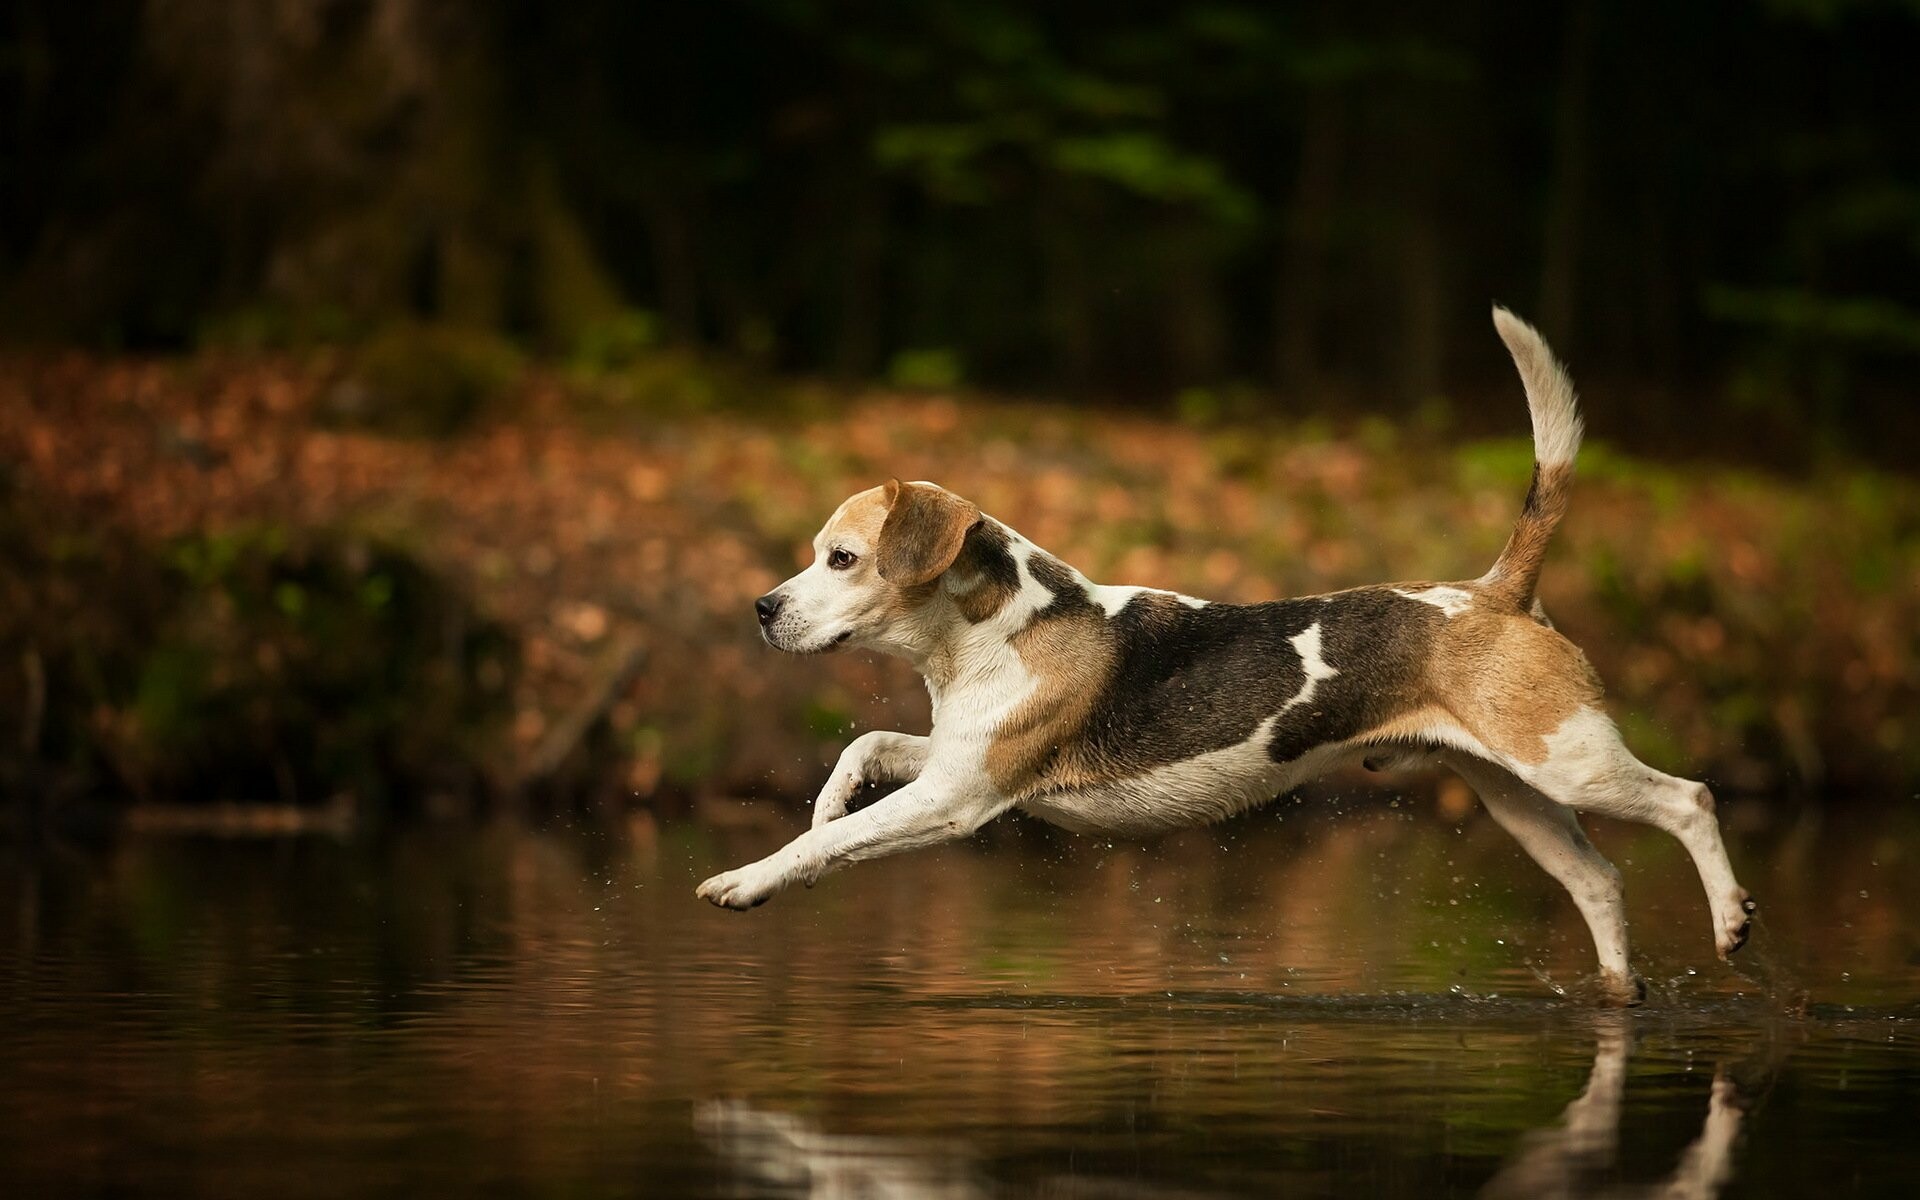 Beagle: The dog breed most often used in animal testing, Mammal. 1920x1200 HD Wallpaper.